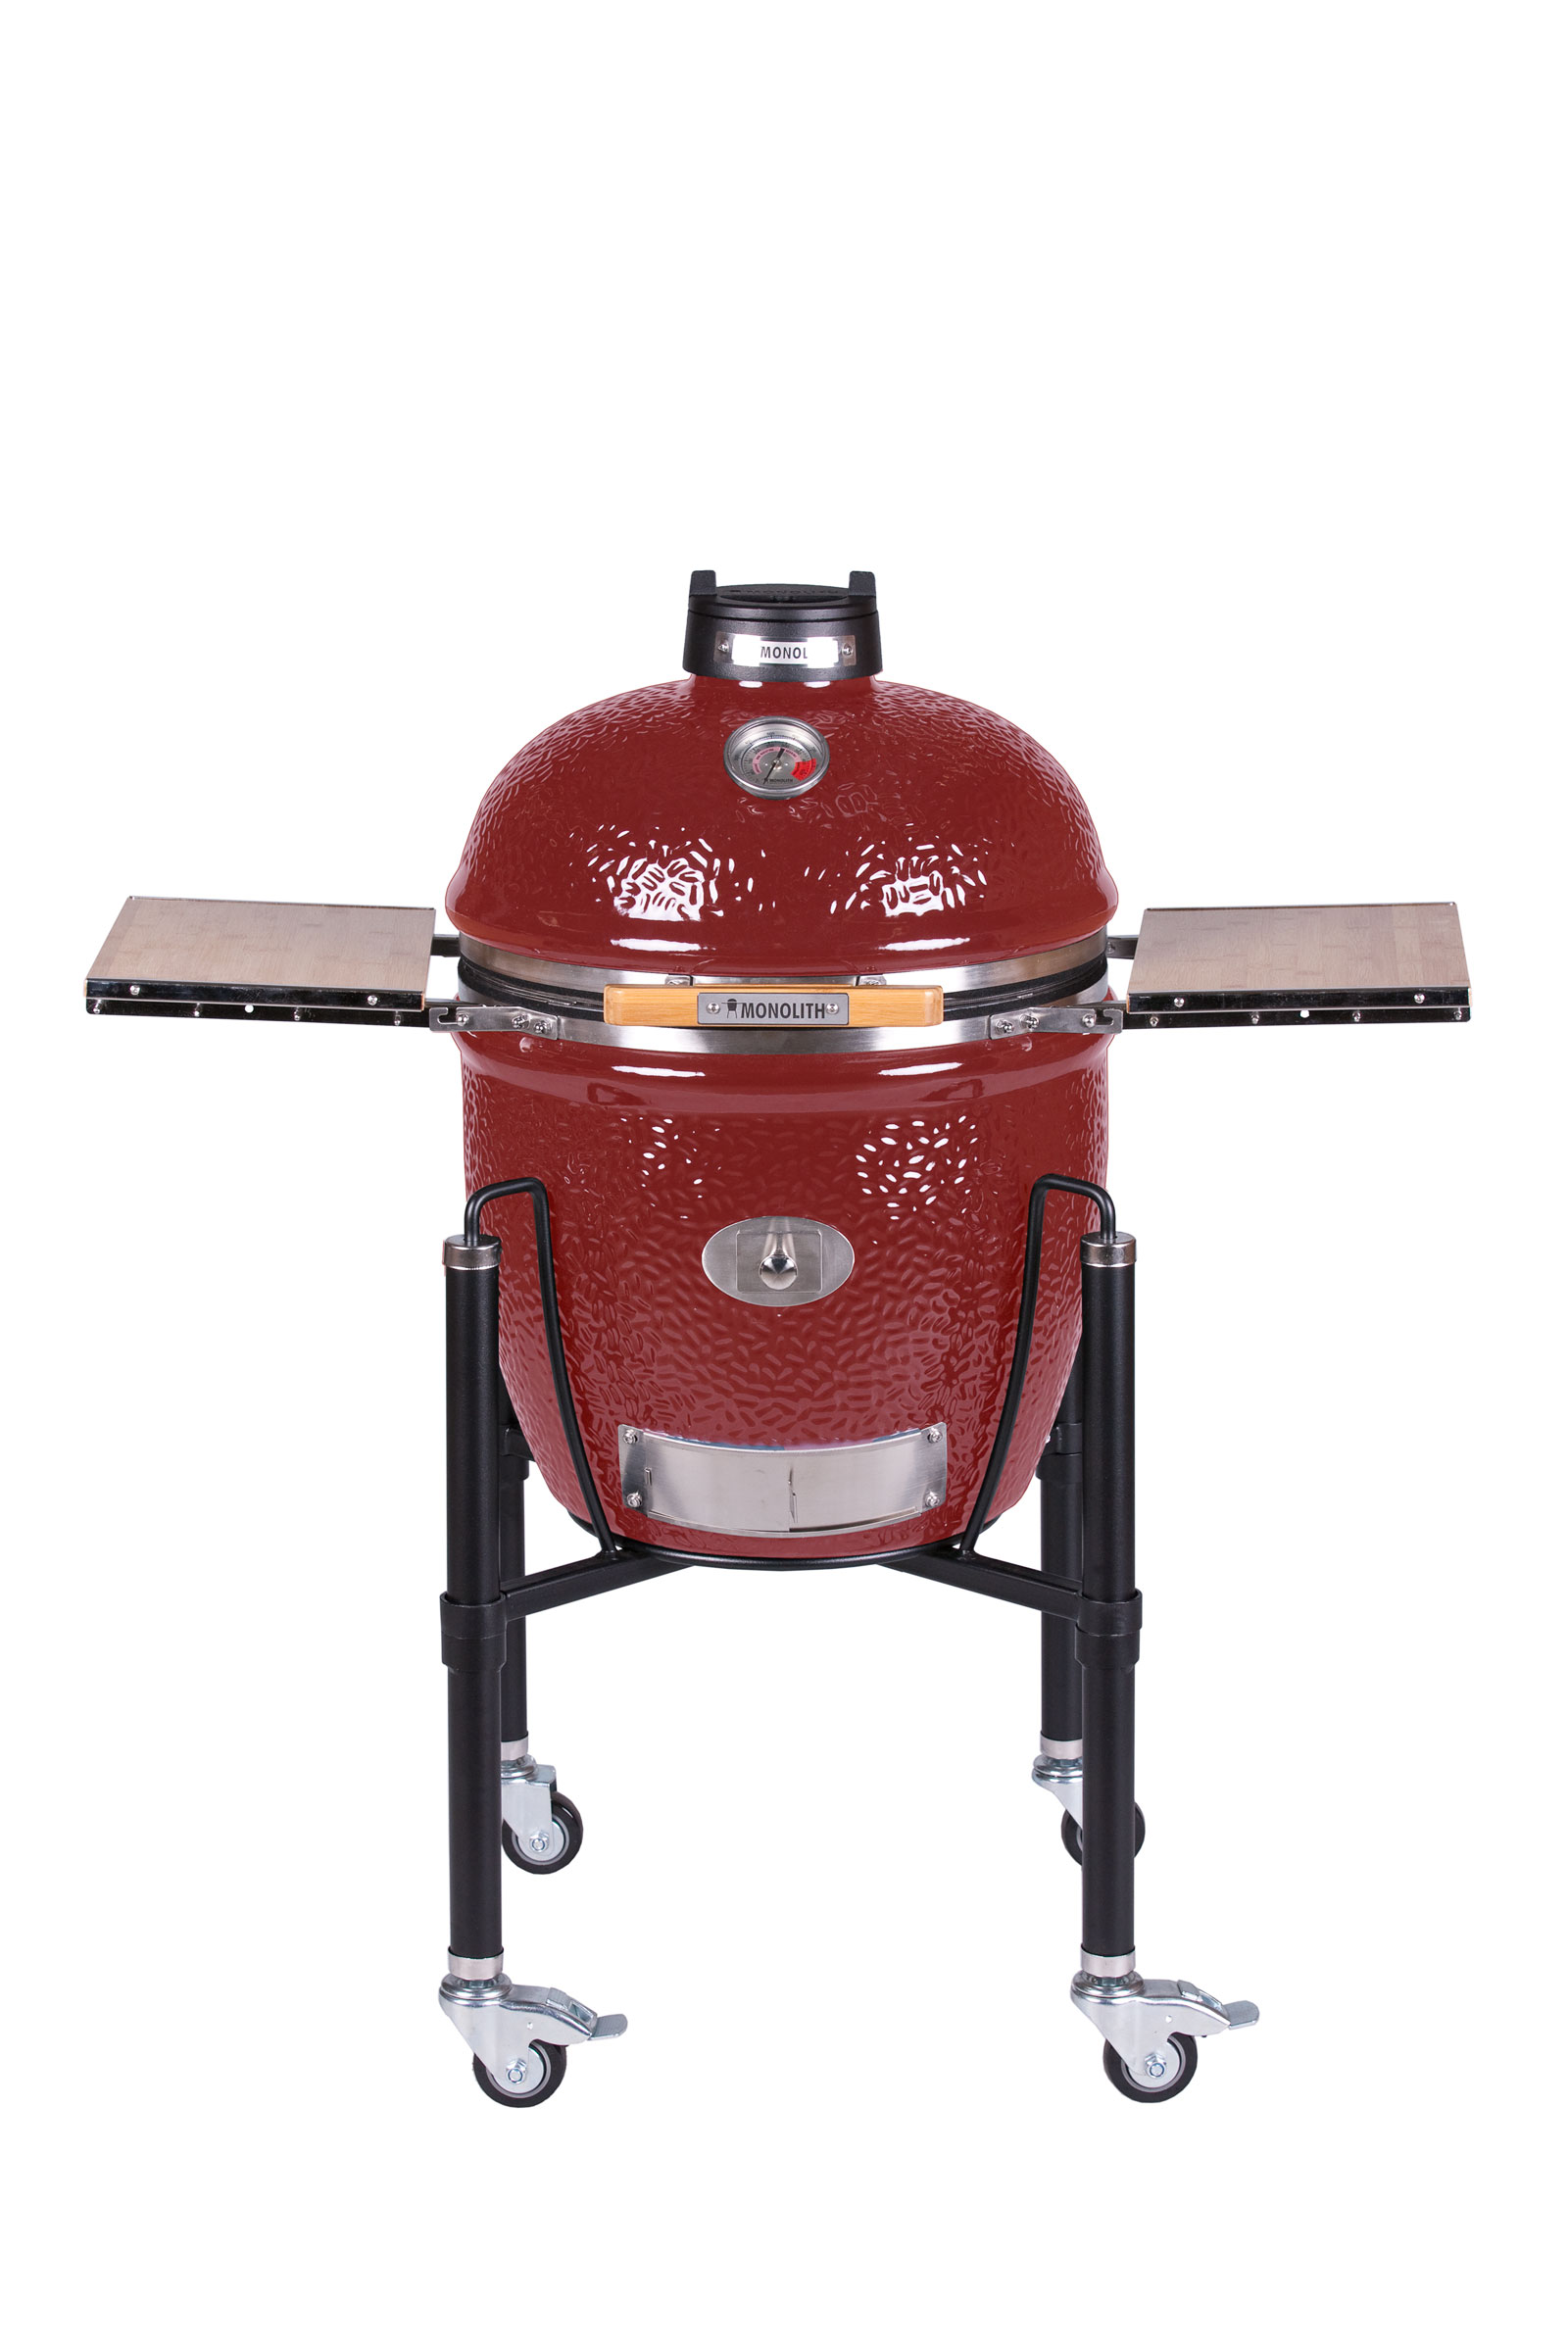 Monolith Classic Pro-Serie 2.0 inkl. Gestell & Seitentische, Holzkohlegrill, Rot 